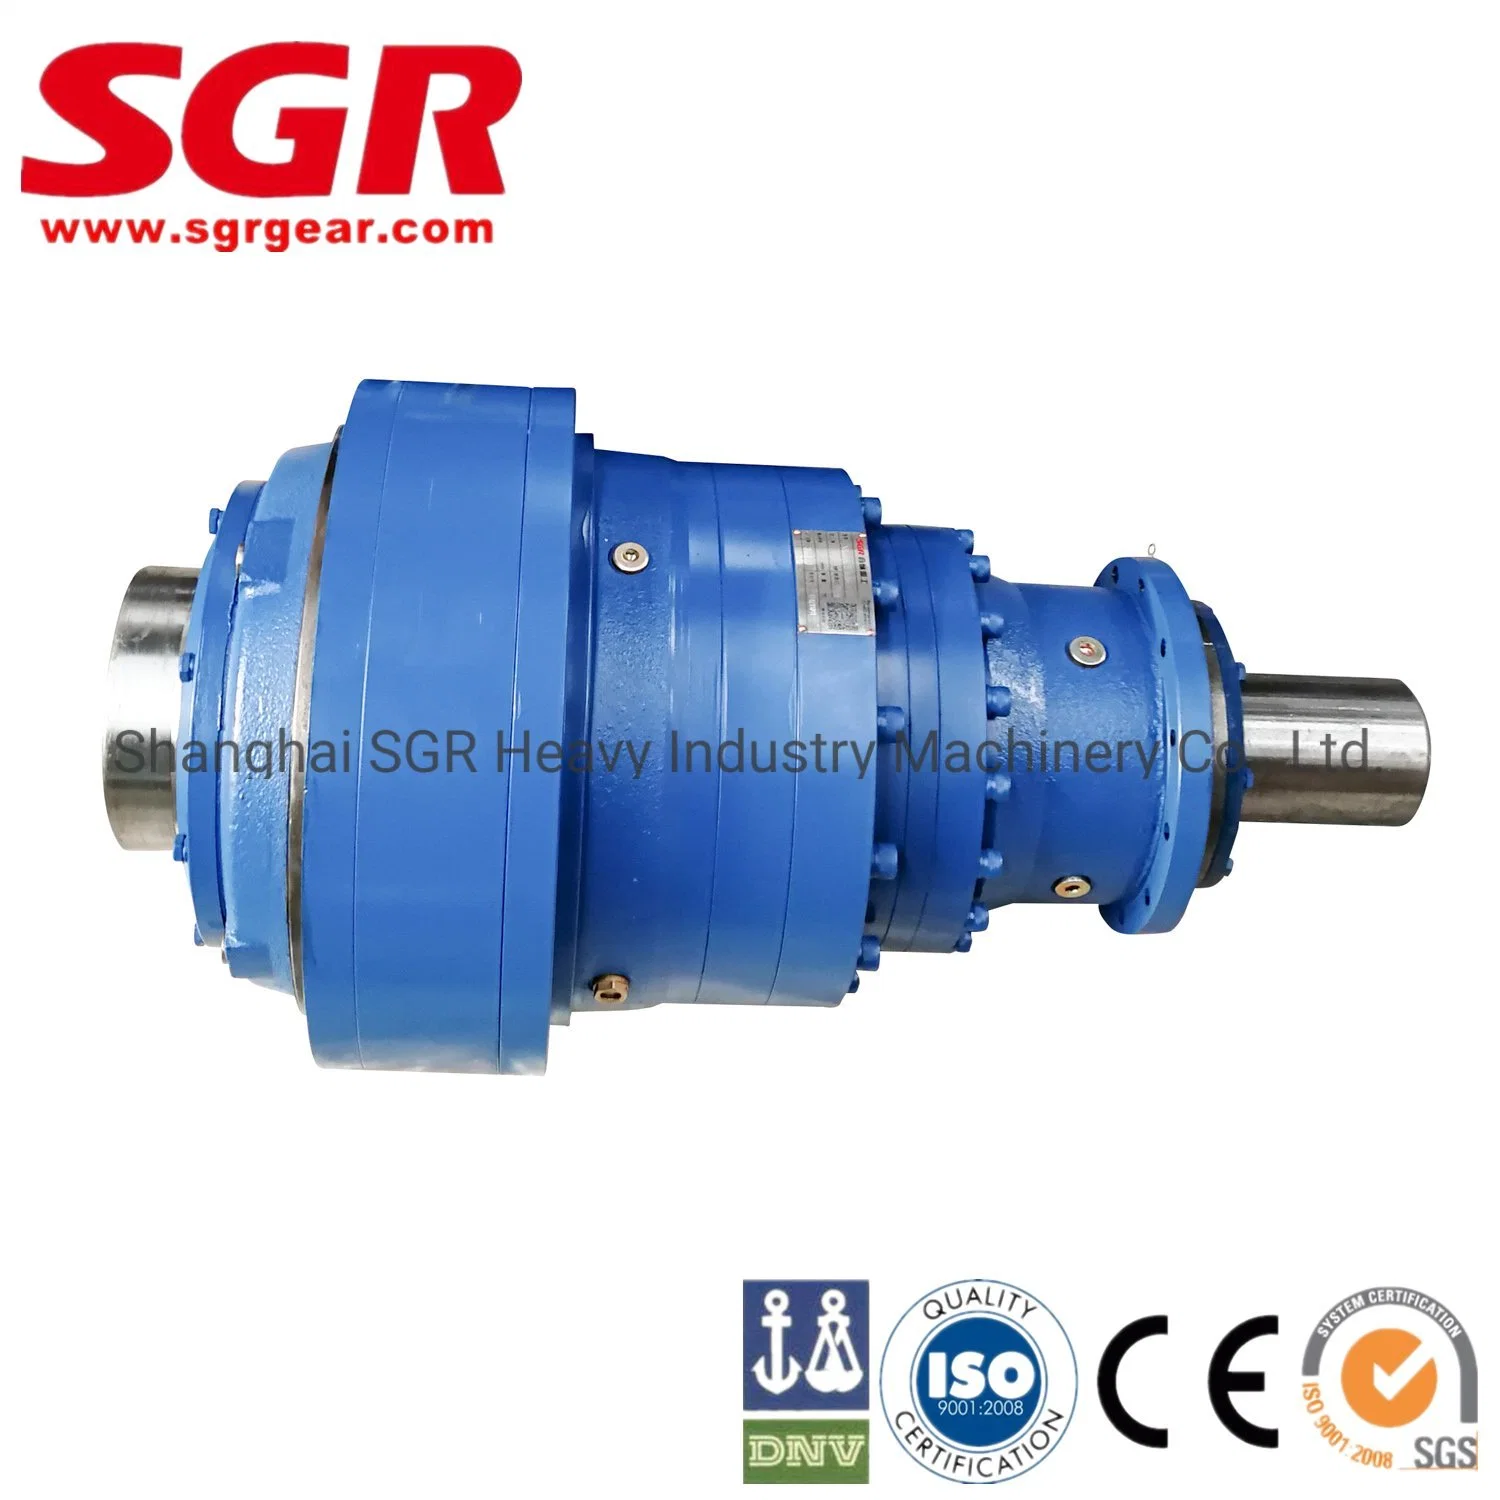 Equivalent to Bonfiglioli 300 Series High Torque Planetary Gearbox Geared Motor